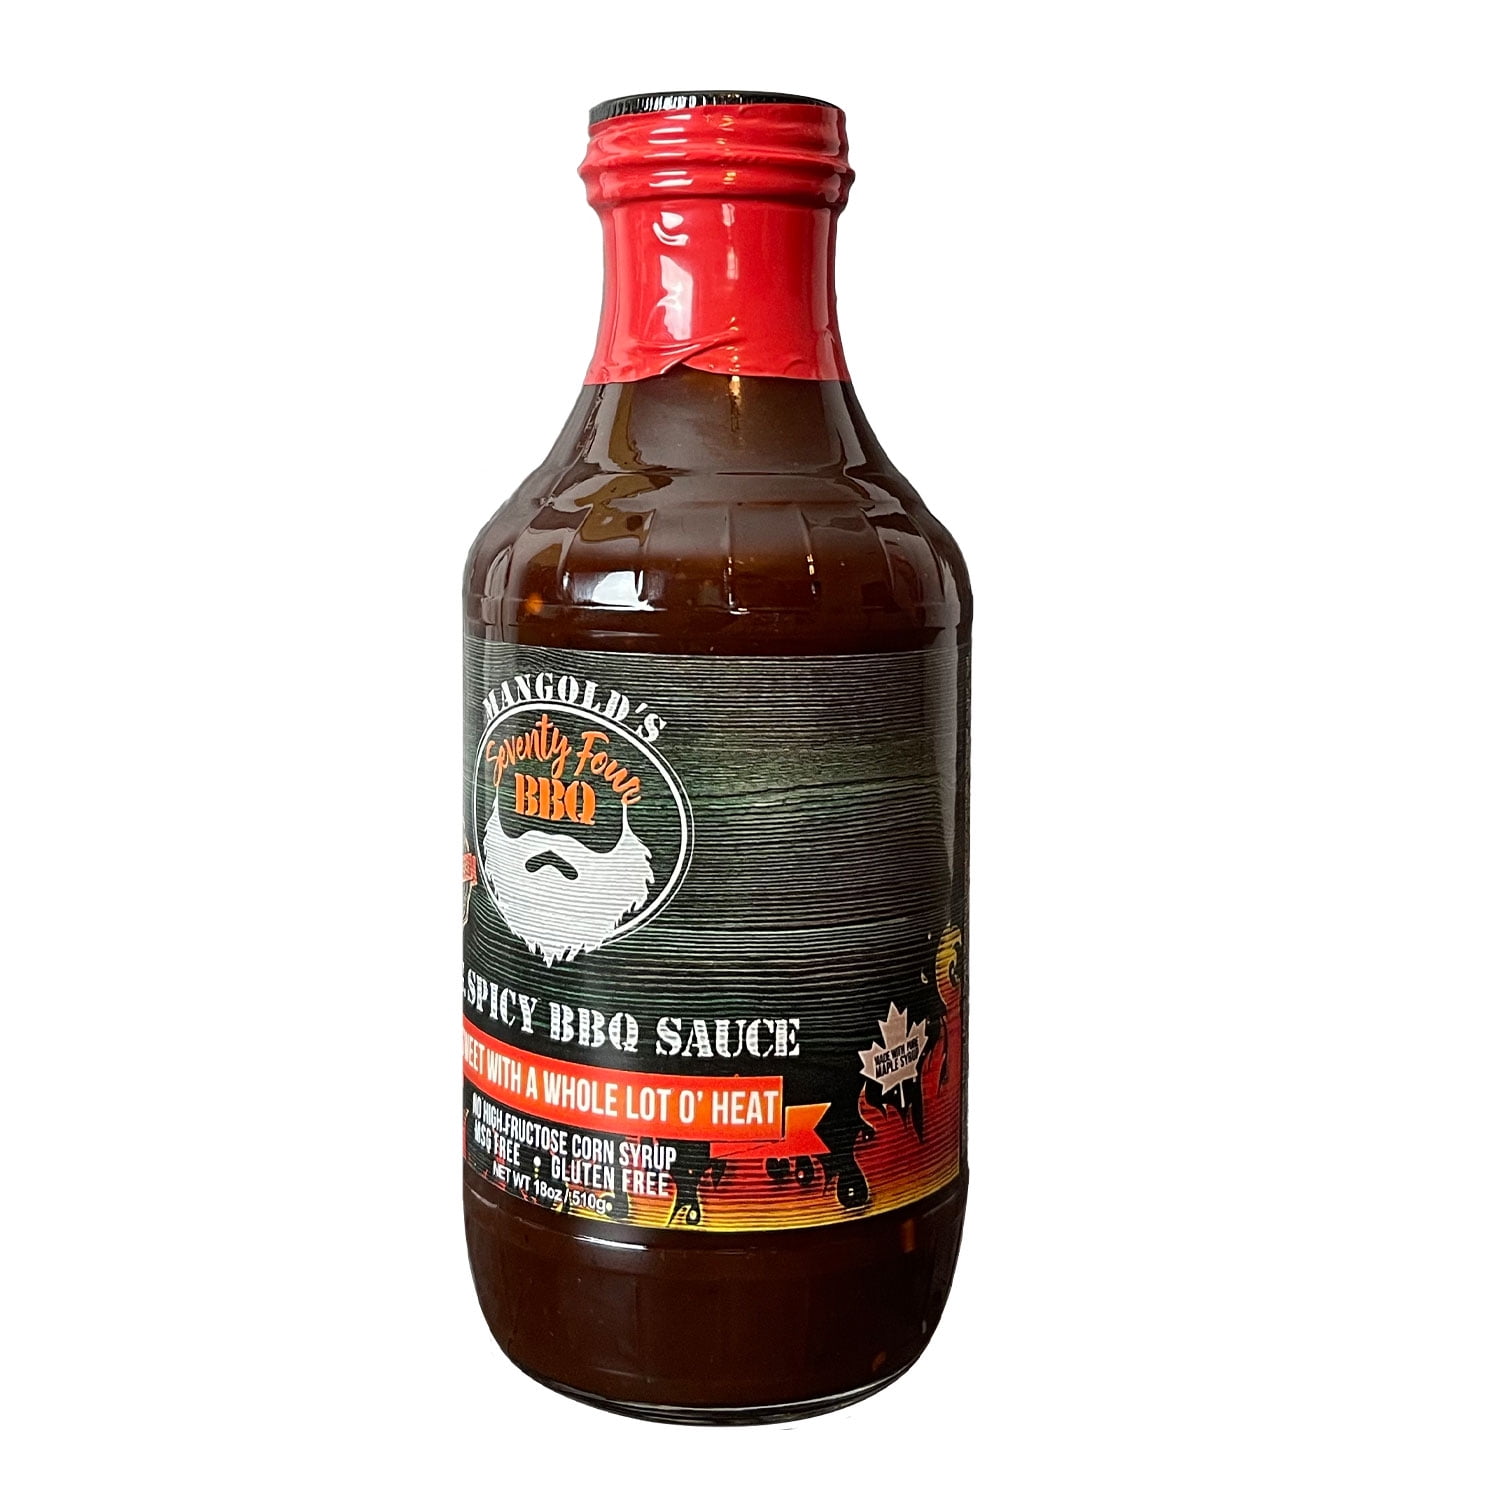 BBQ Sauce 18 Oz, Little Sweet with A Whole Lot Of Heat, 74 BBQ Mangold's  O.G, Small Batch Barbeque sauce perfect for grill, chicken, pork, beef,  ribs and chips.